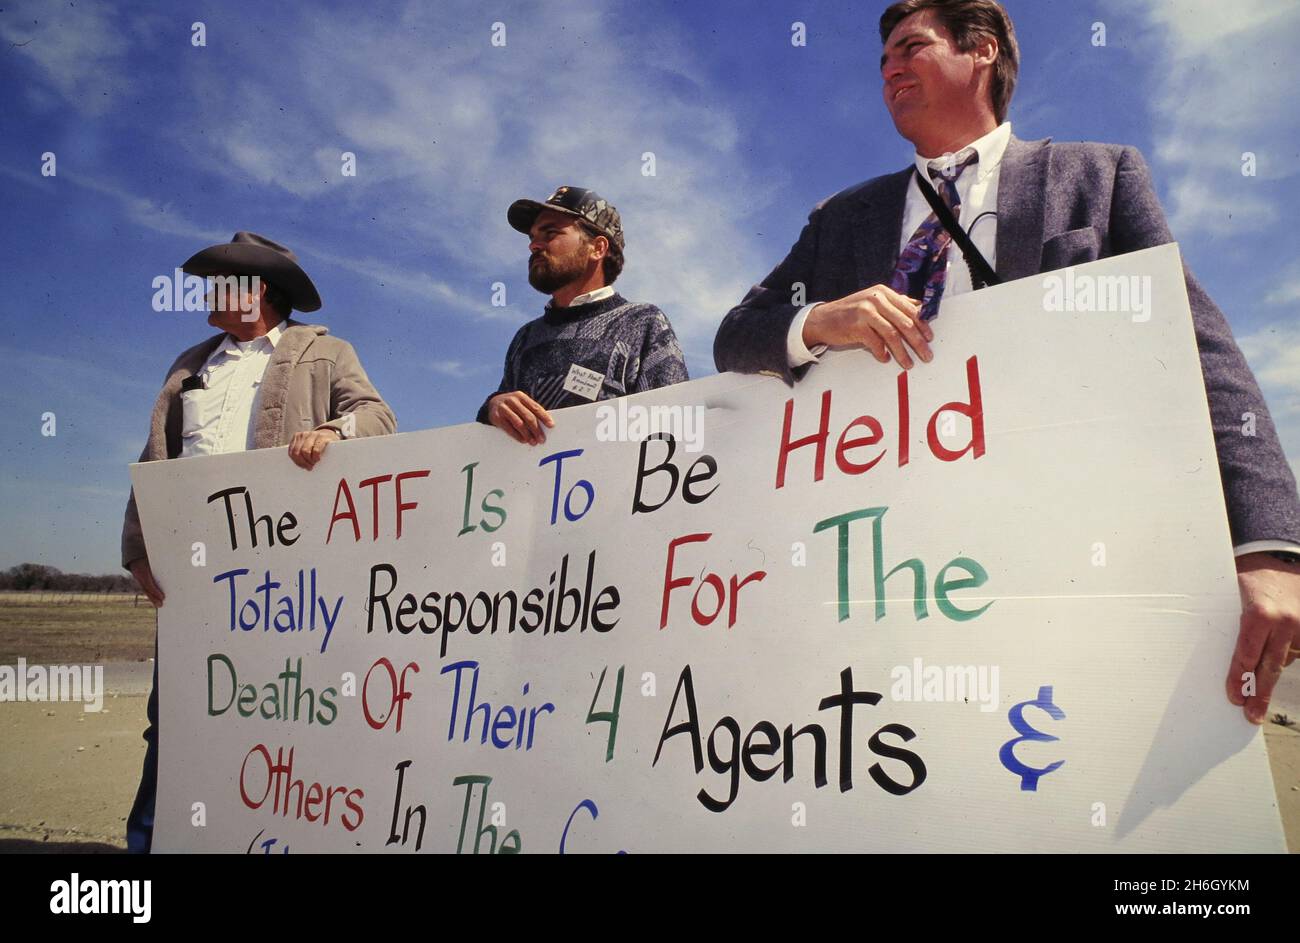 Waco Texas USA, 1993: Protesters in Waco, Texas outside the Branch Davidian siege checkpoint to the cult compound hold a sign placing blame on the federal Alcohol, Tobacco and Firearms (ATF) agency.  ©Bob Daemmrich Stock Photo